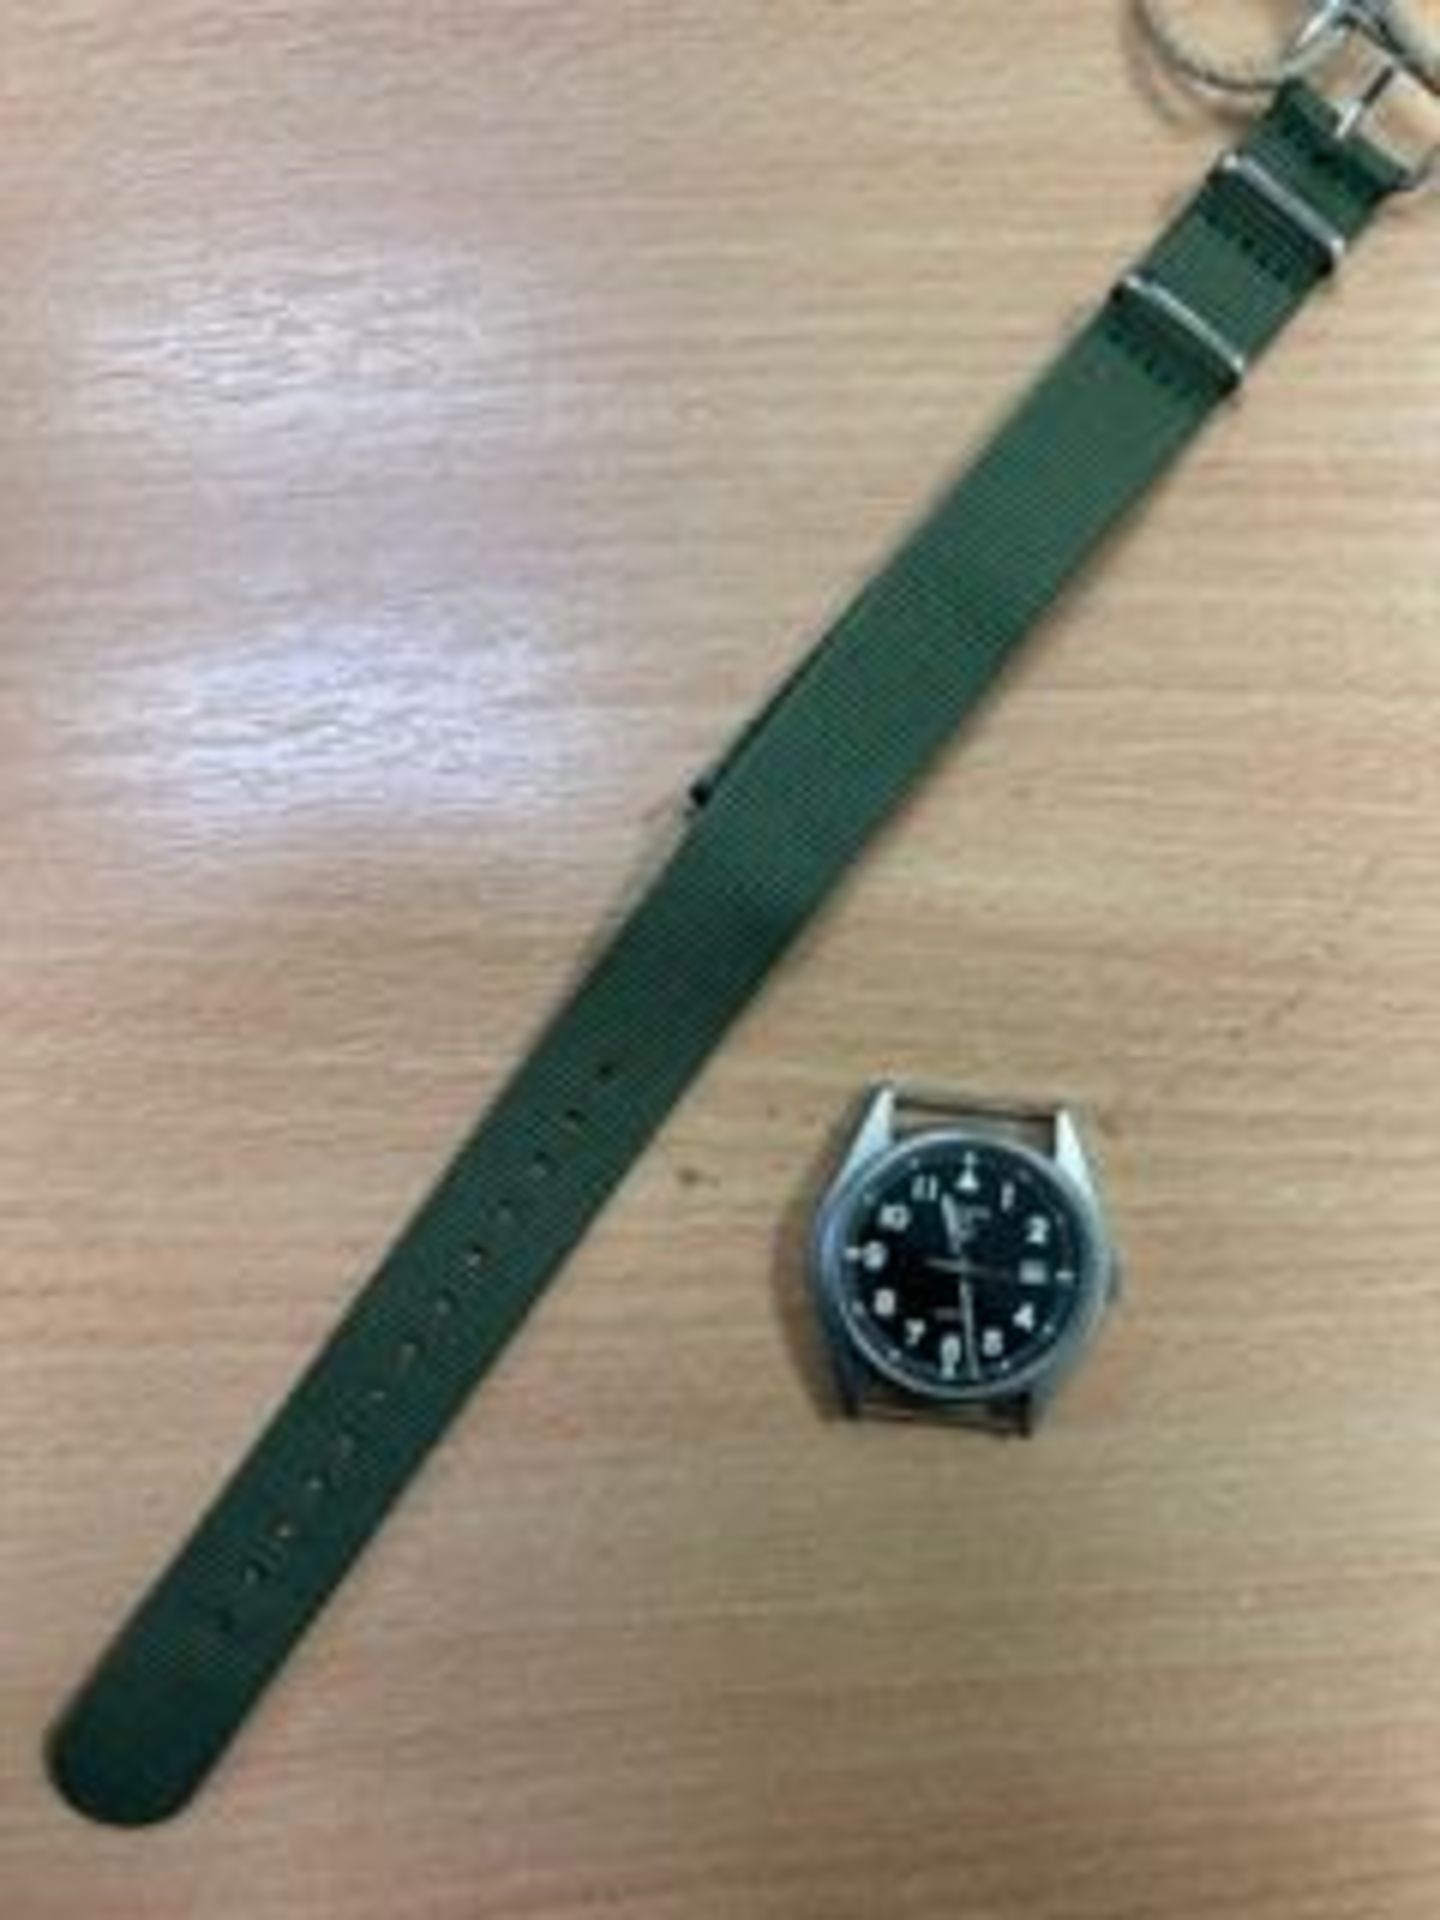 PULSAR BRITISH ARMY W10 SERVICE WATCH WATER RESISTANT NATO MARKS DATE 2004 - Image 2 of 6